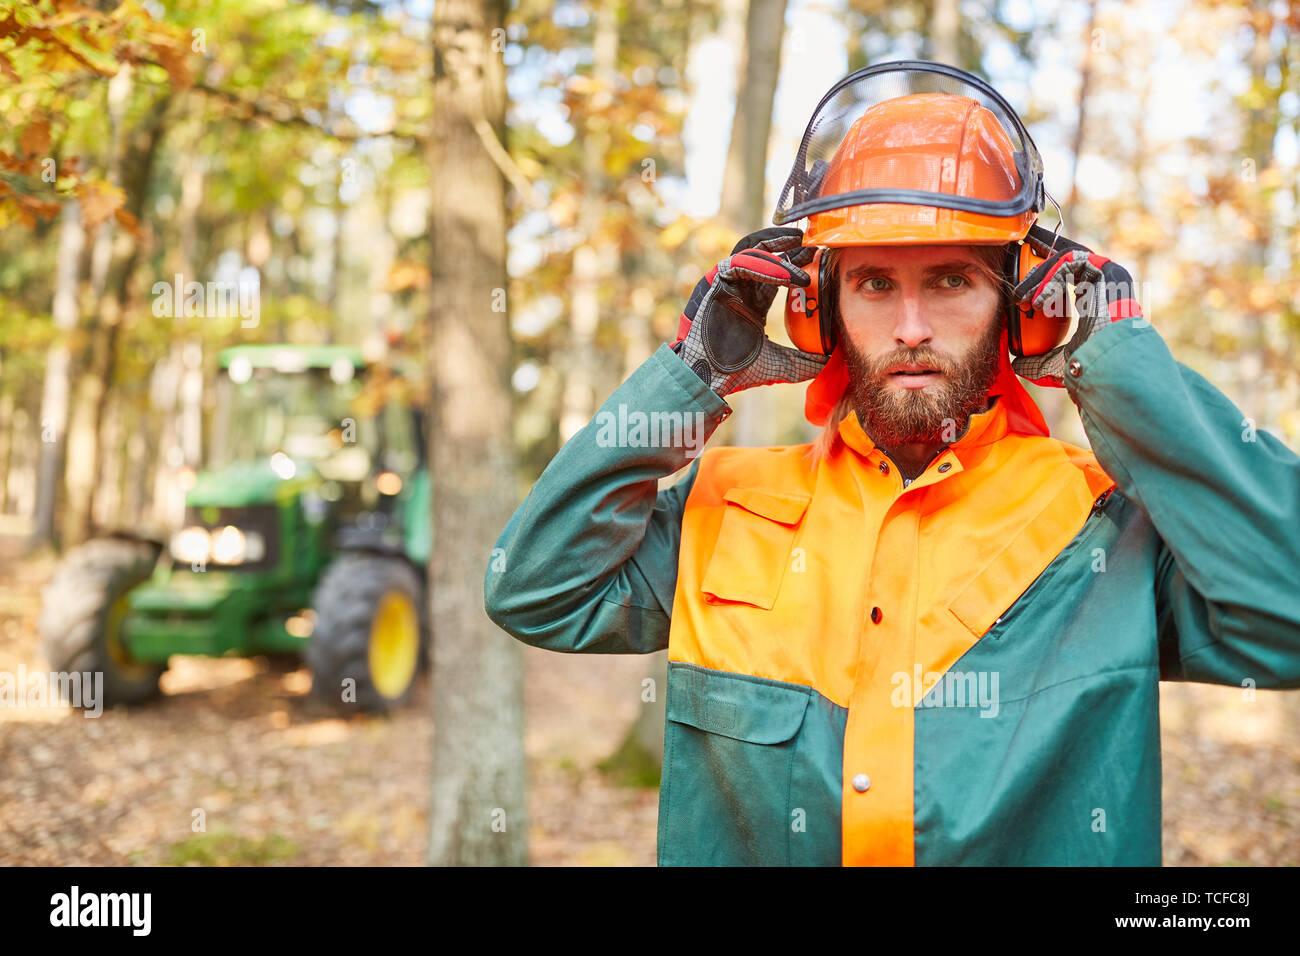 Forest worker or lumberjack with protective gear during harvesting in the forest Stock Photo